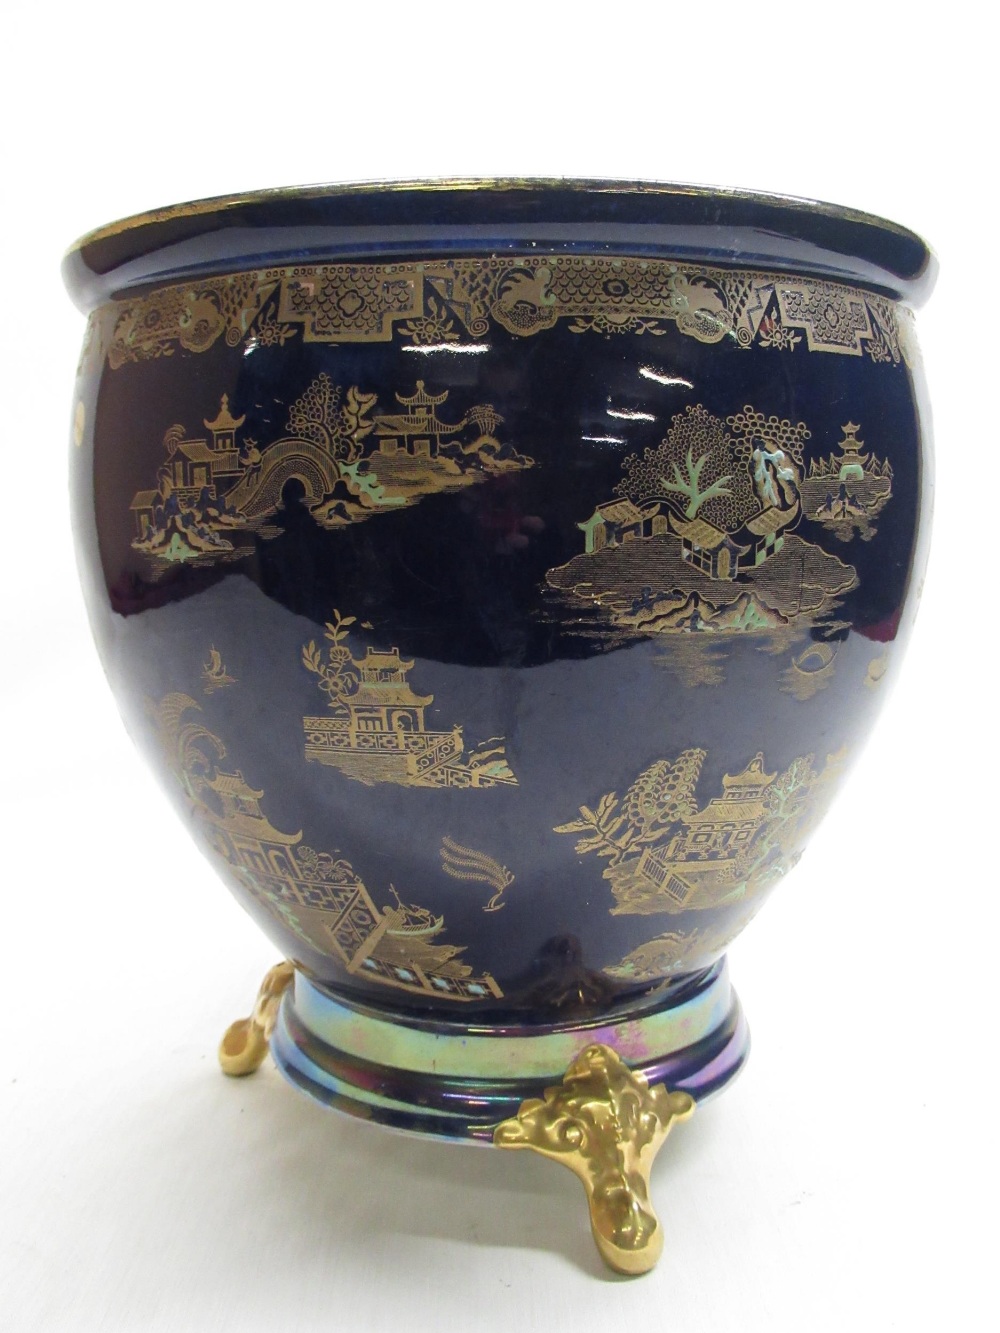 W & R Carlton Ware navy blue ground chinoiserie decorated Kang Hsi jardinière on matching stand